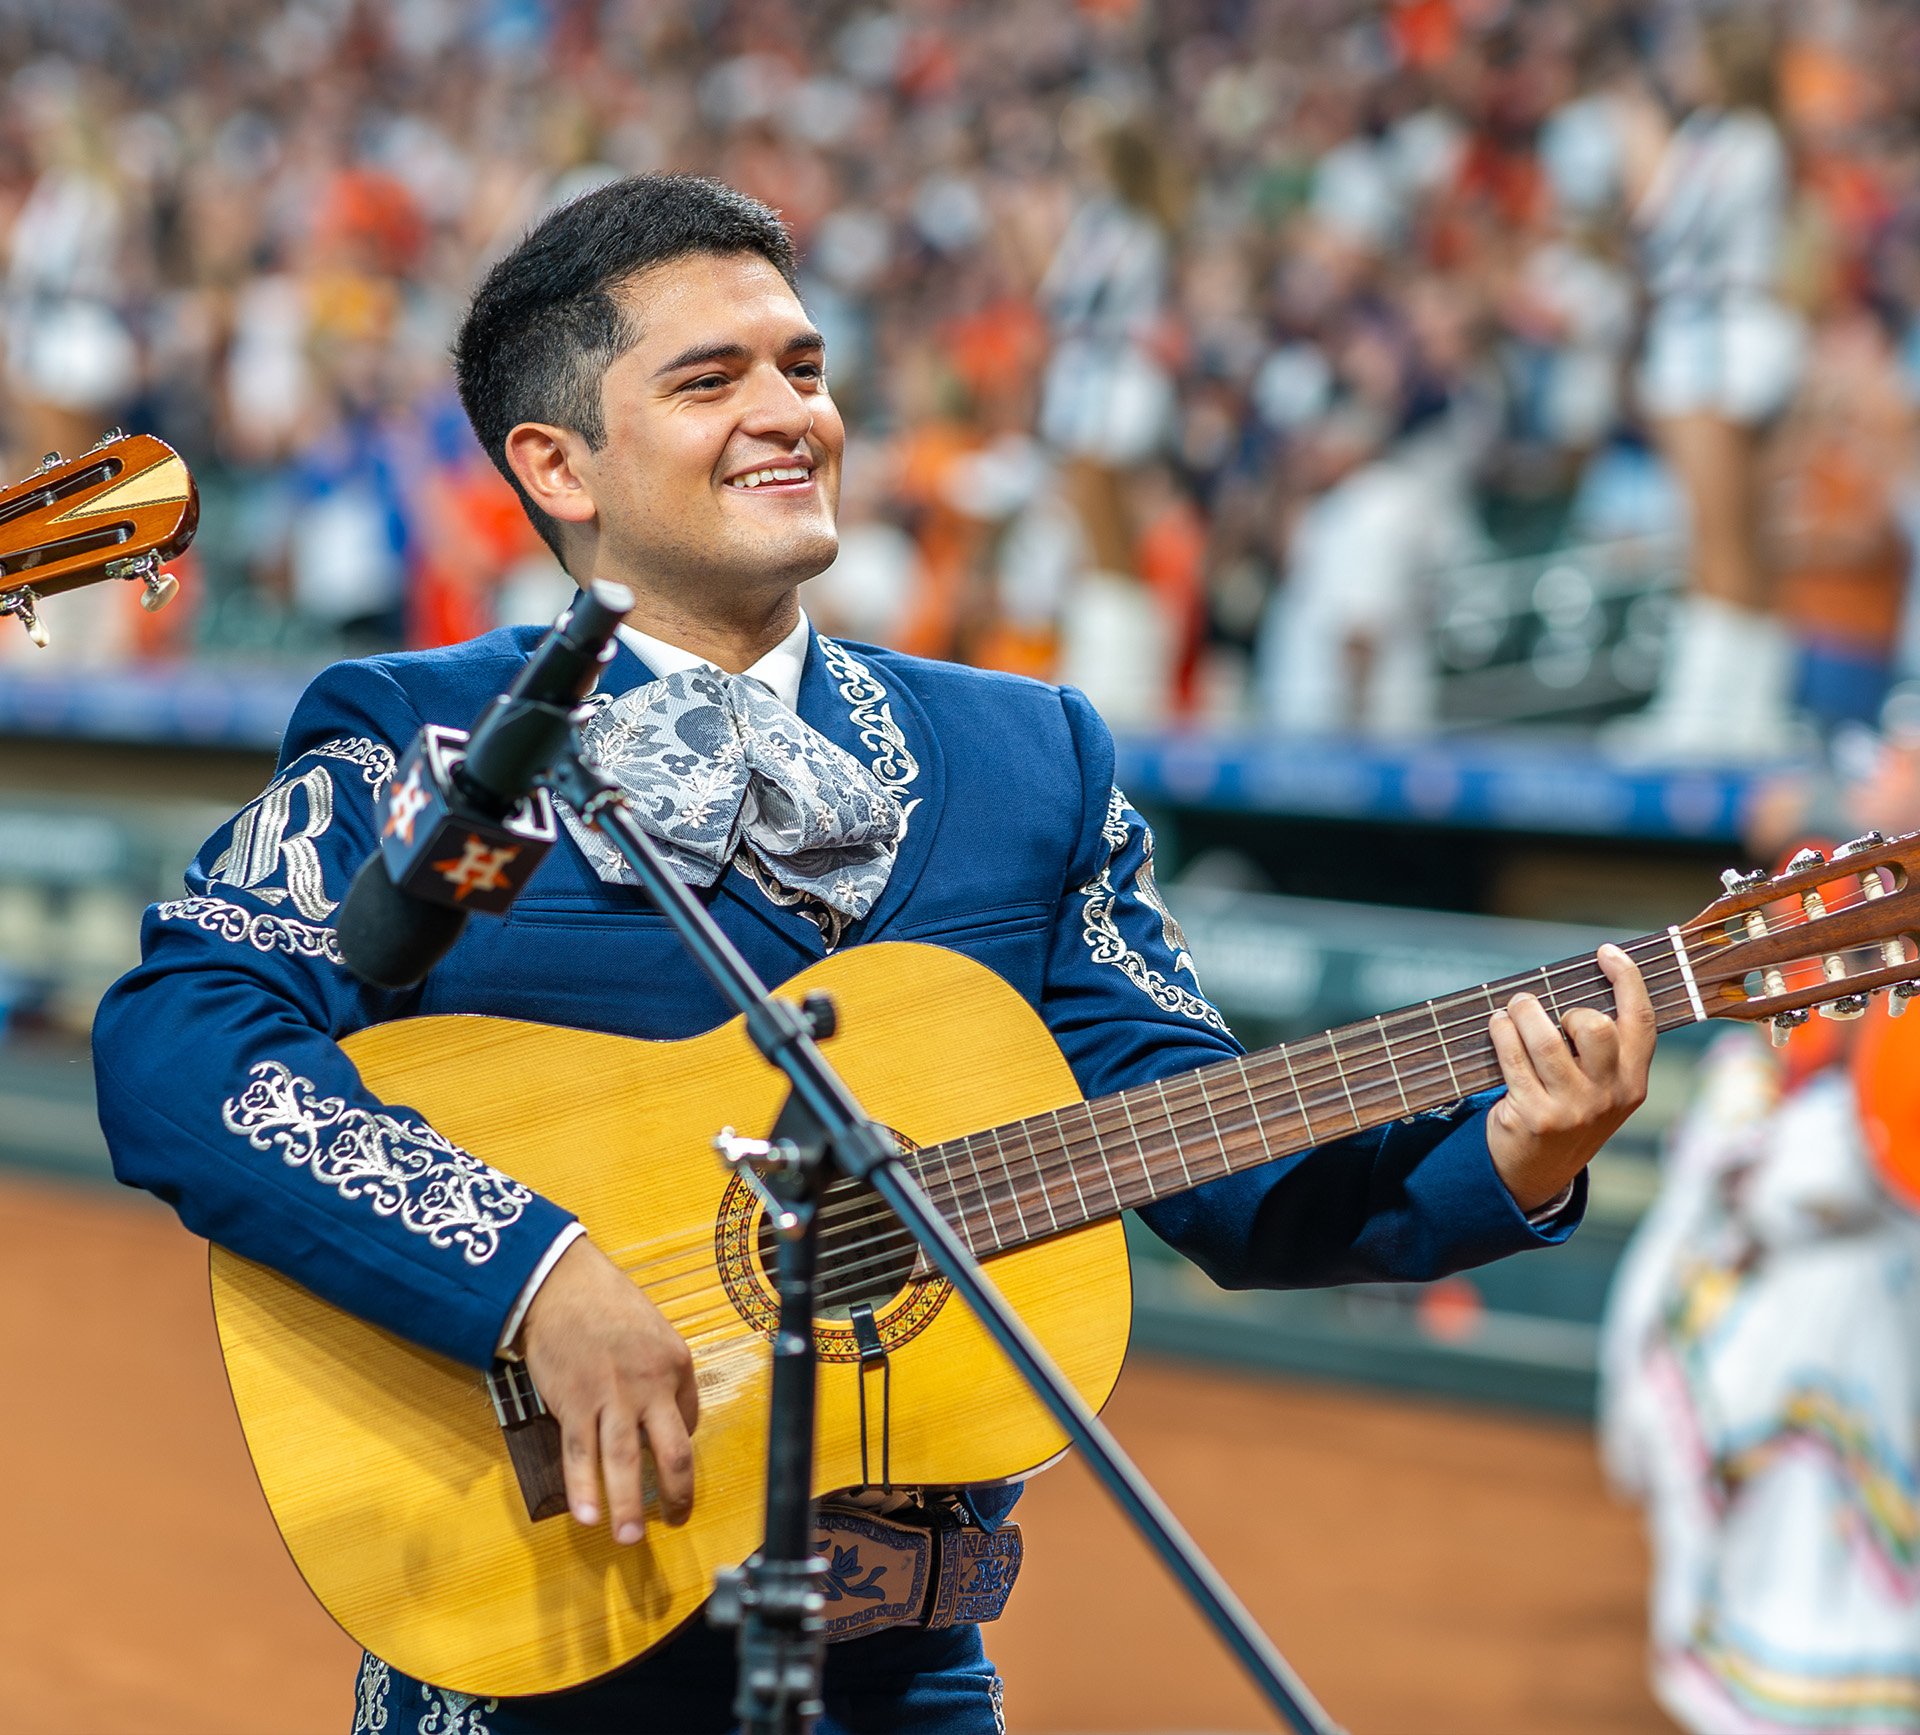 Dental student Cesar Zapata performs the national anthem with his mariachi band, Mariachi Luna Llena, as part of the Houston Astros’ Hispanic Heritage Month festivities on Sept. 23 at Minute Maid Park. Photo courtesy of Rice University.